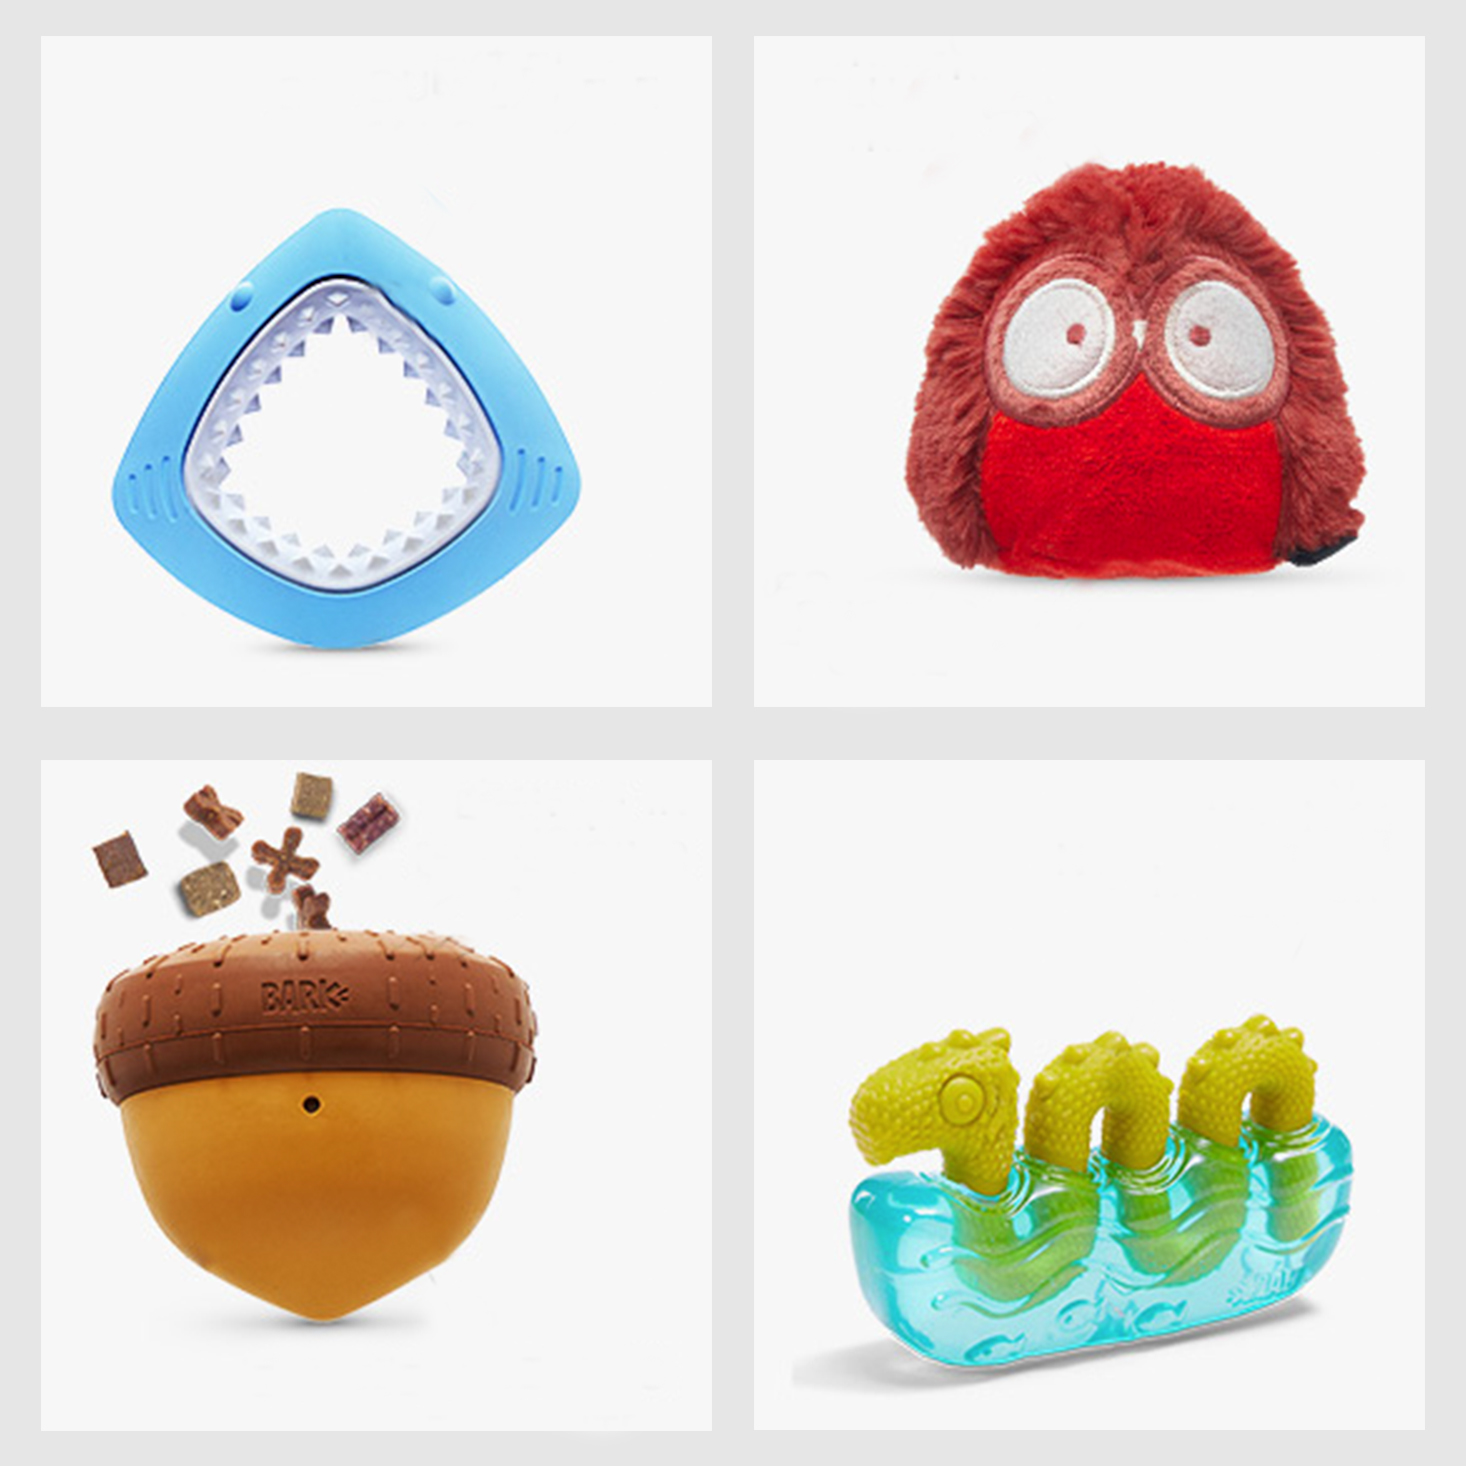 Only for Your Dog: 6 Free Toys from BarkBox Super Chewer!